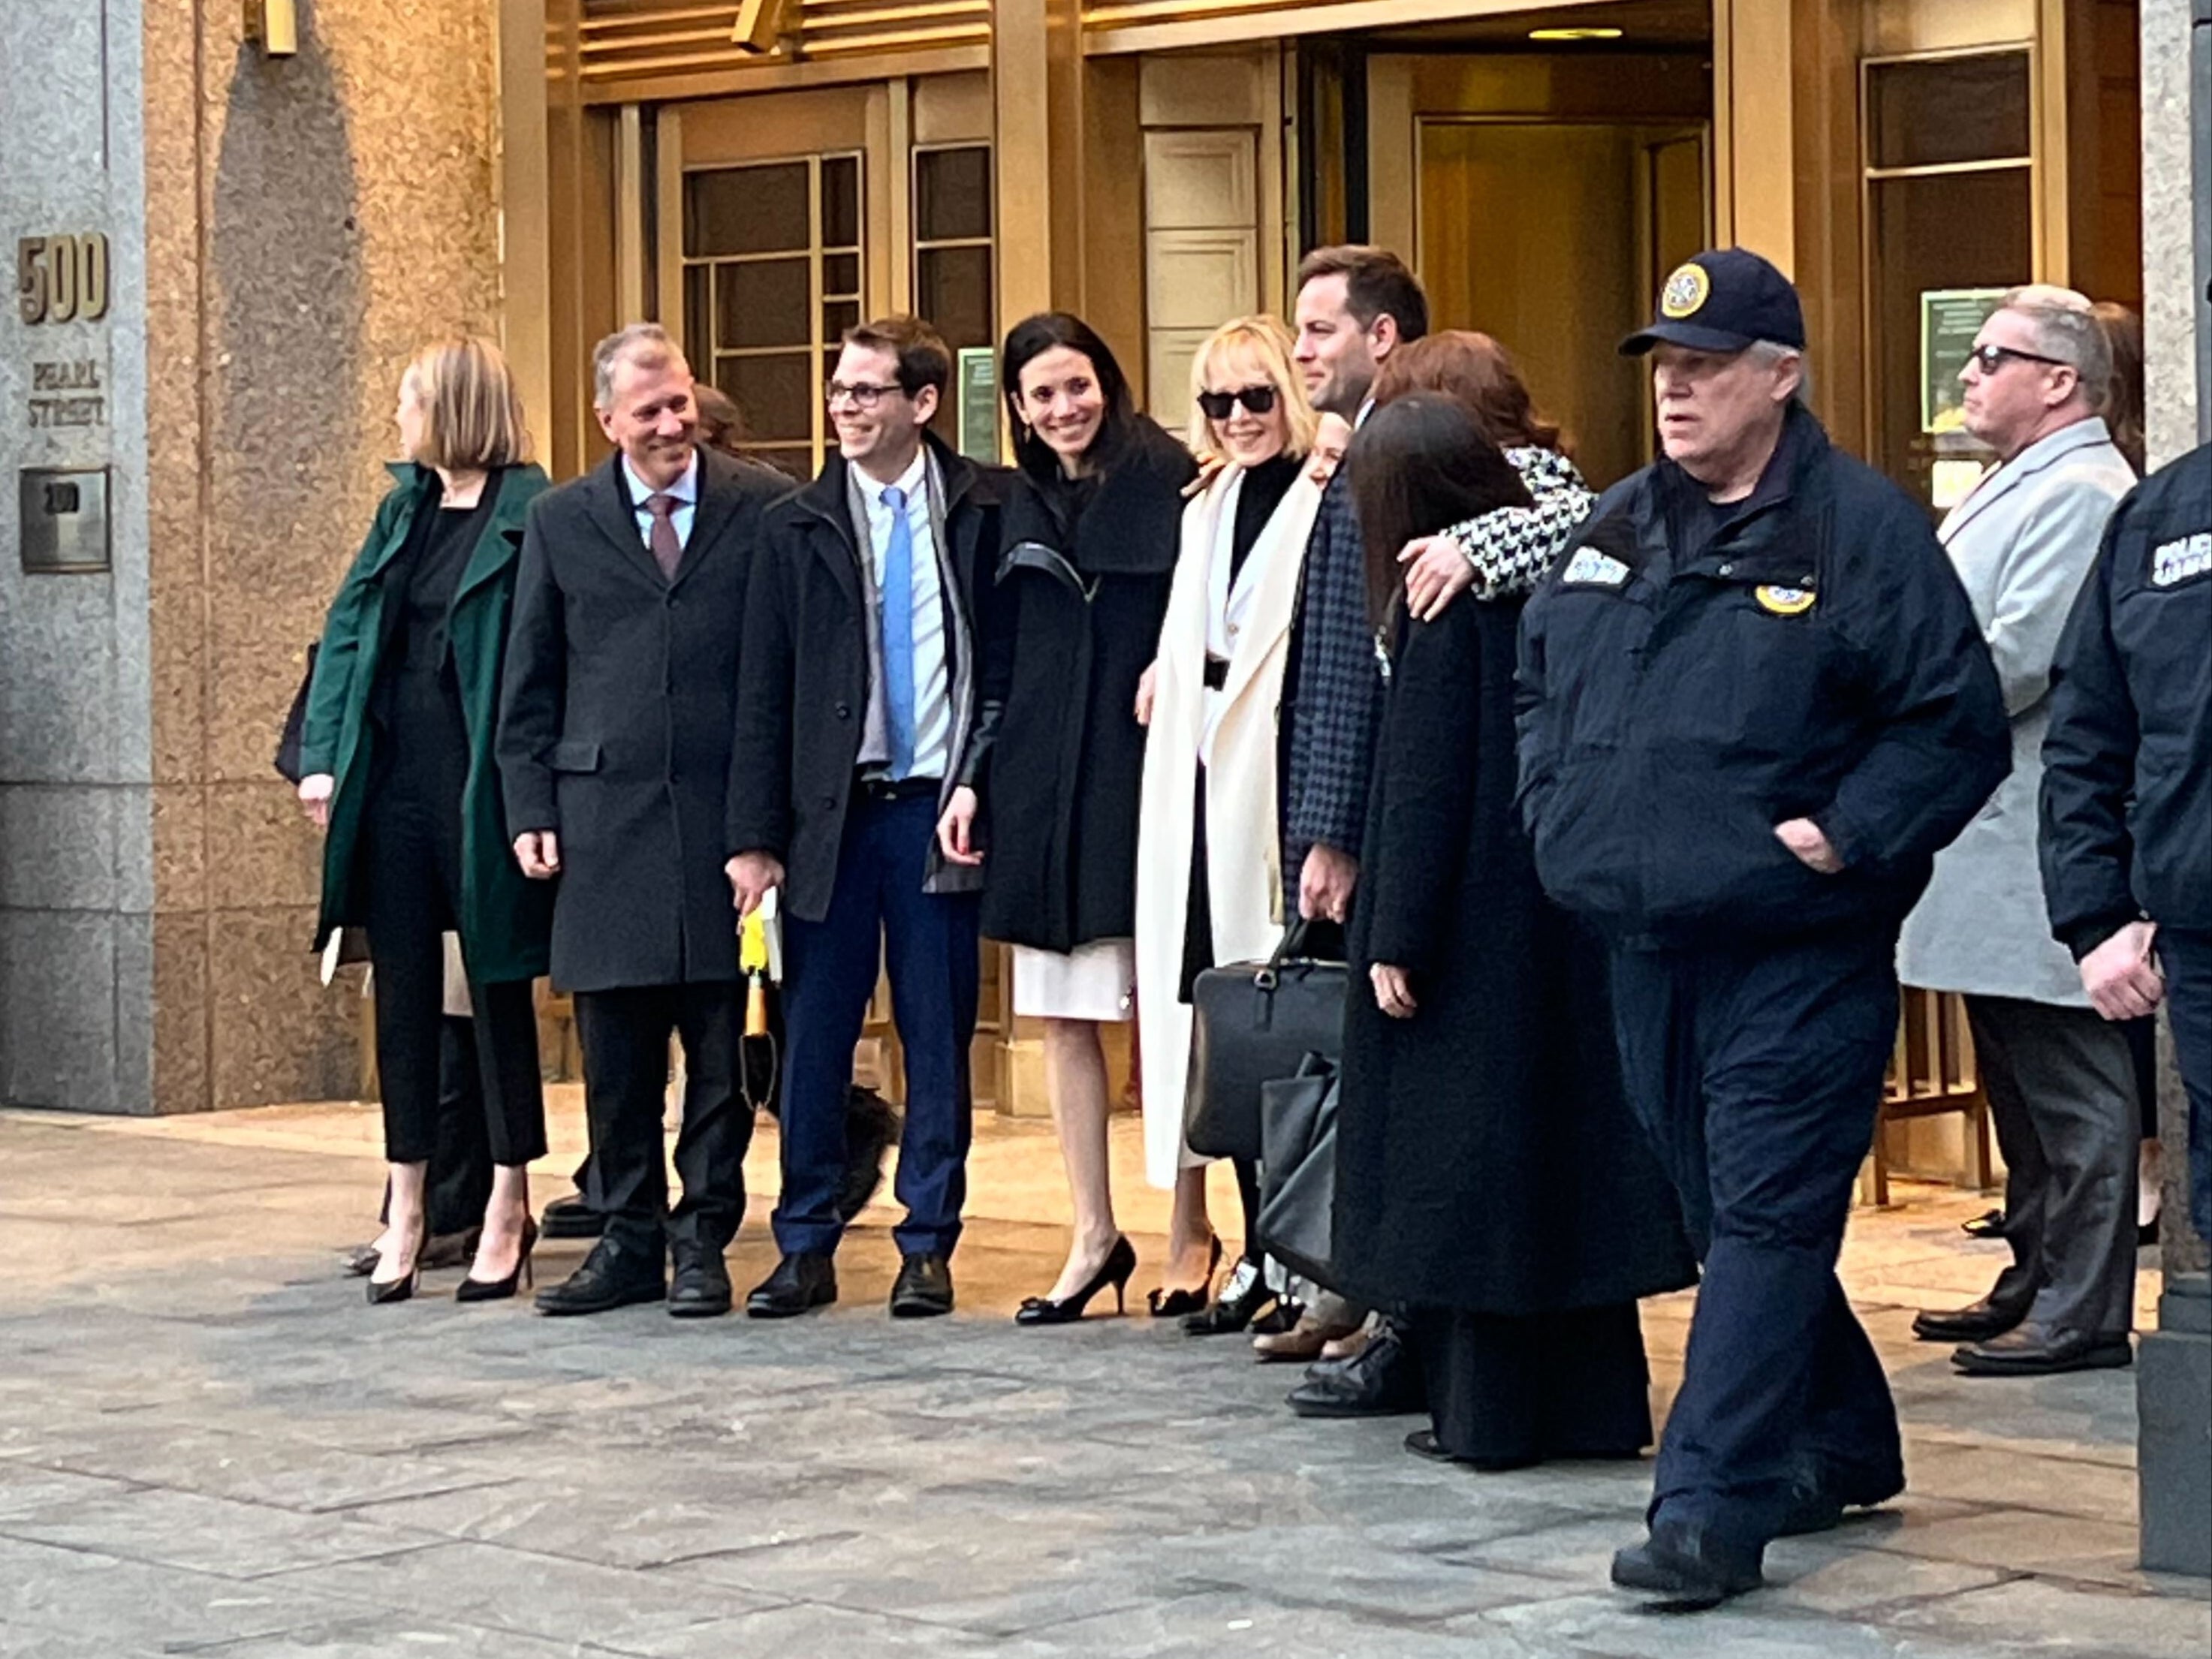 E Jean Carroll and her legal team leave court after a jury awarded her $83m in defamation damages in the case she brought against Donald Trump